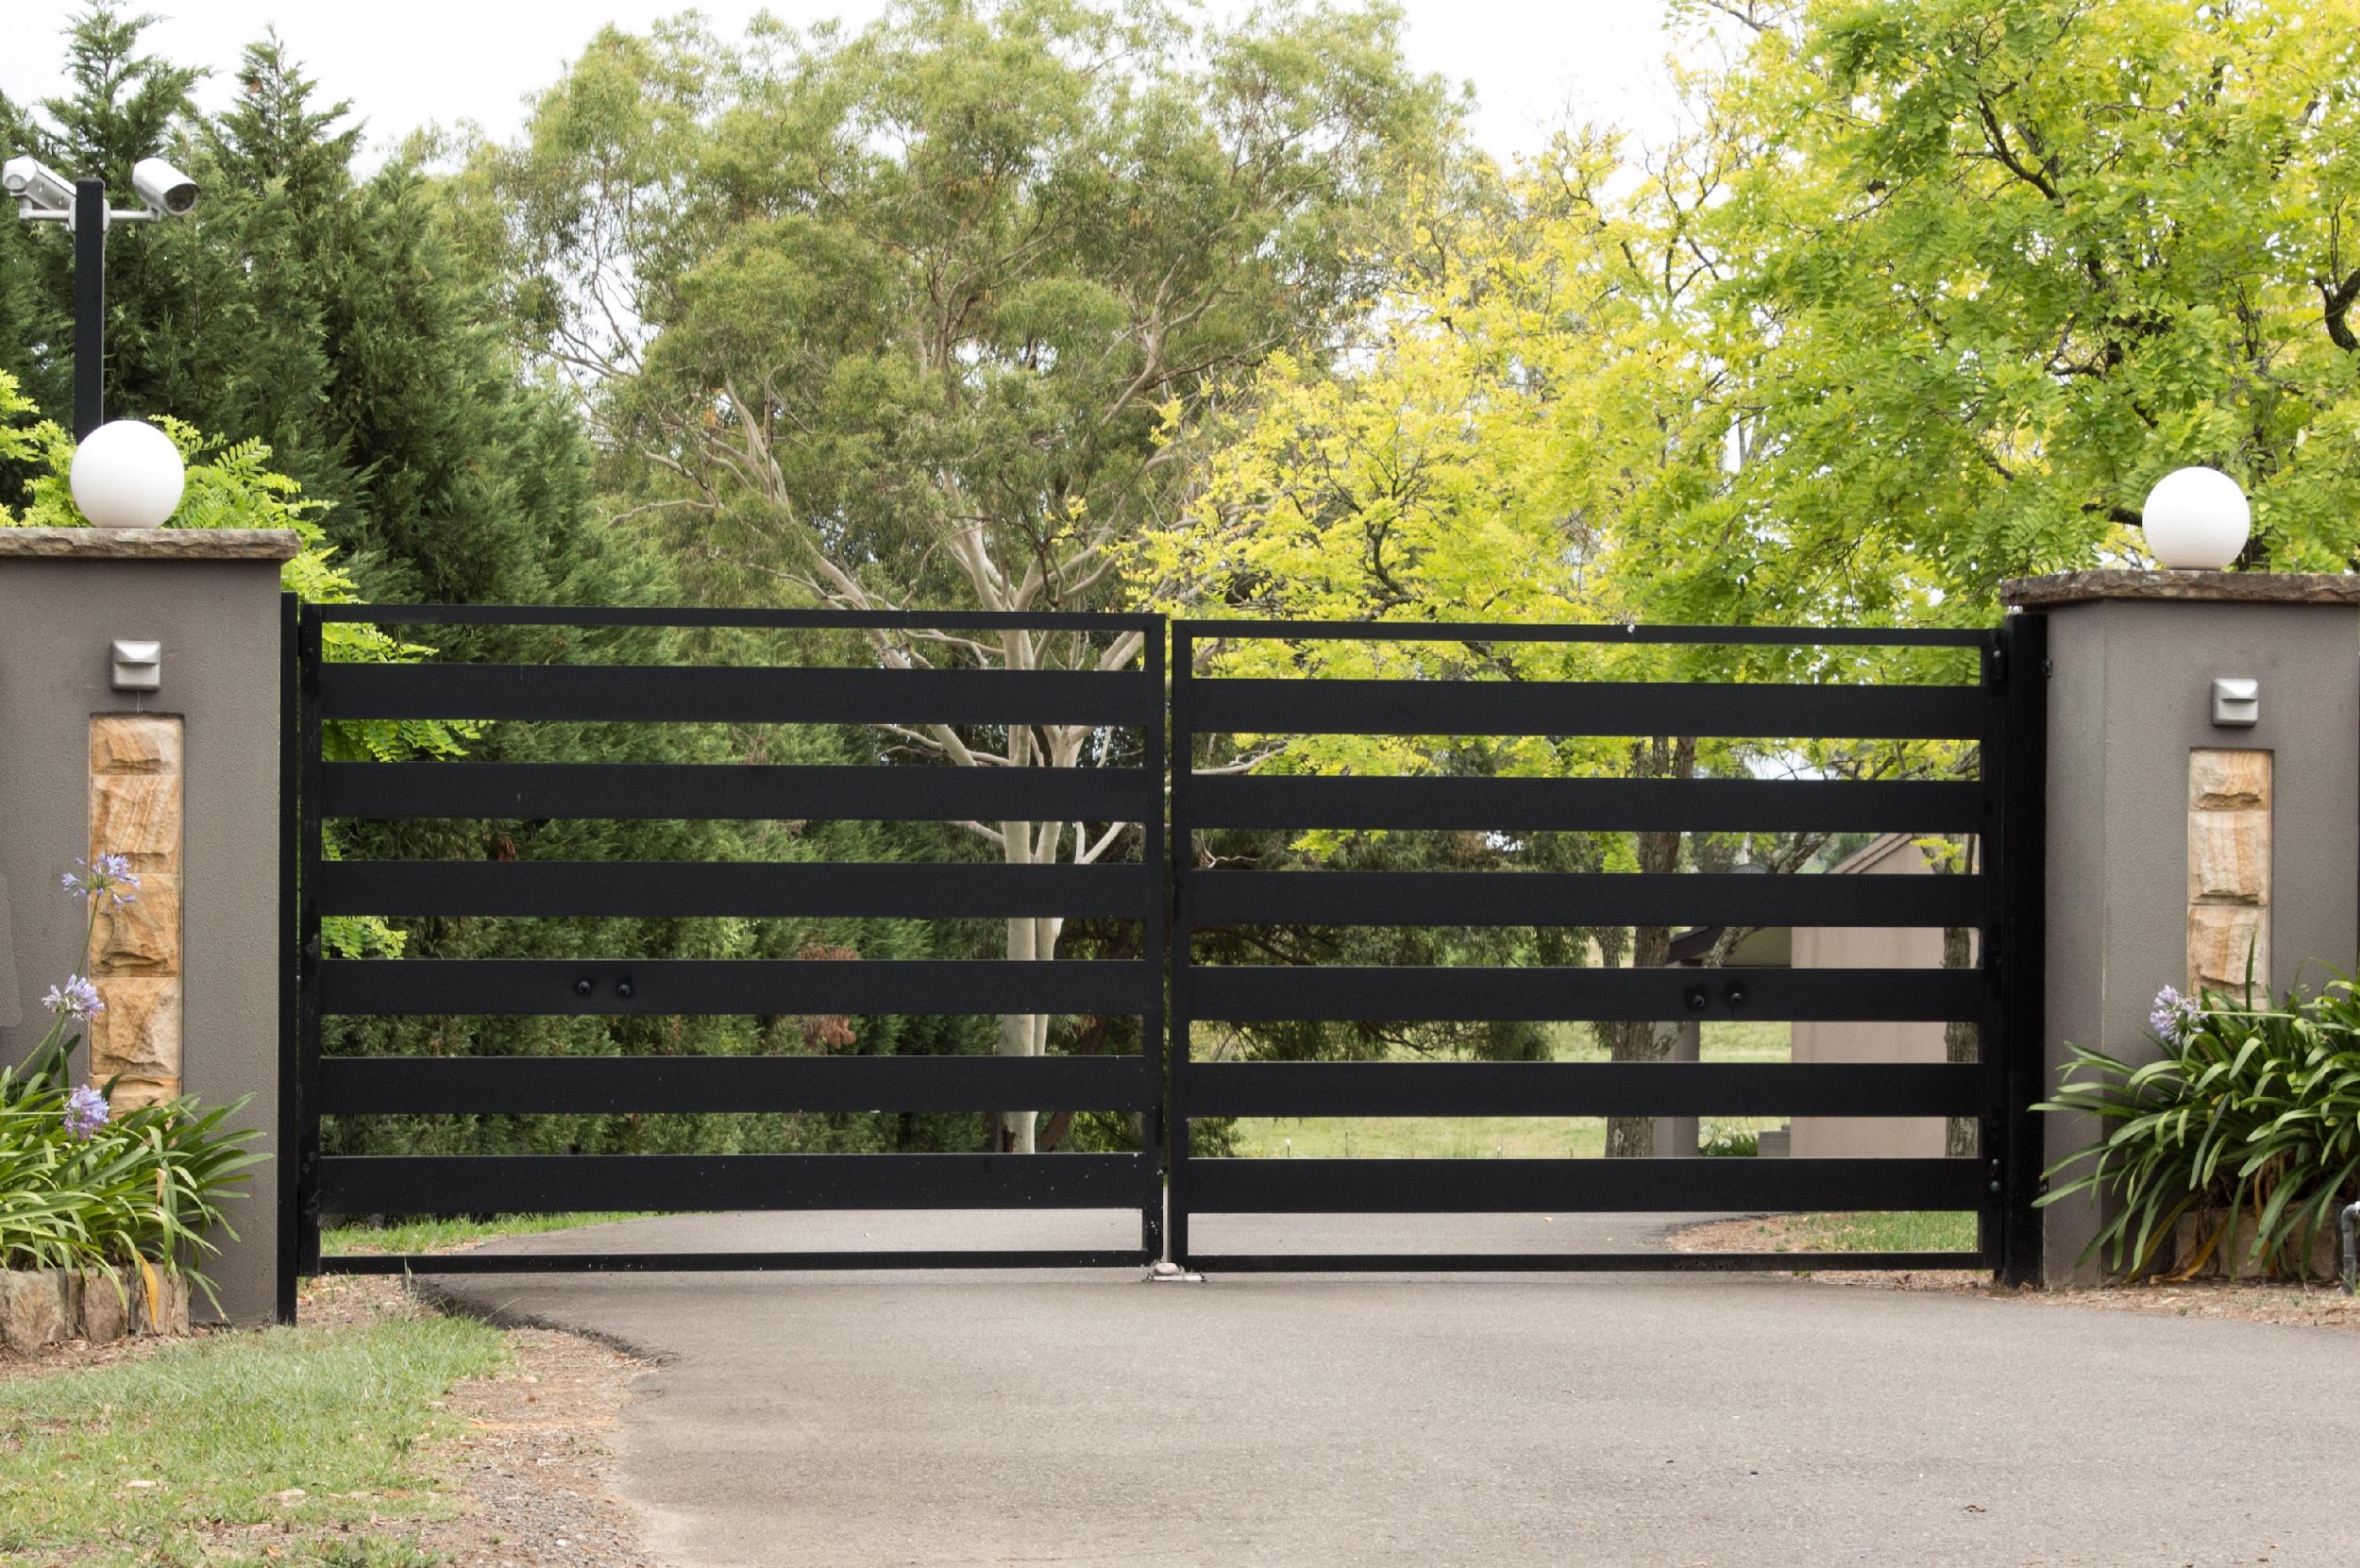 Marvelous Info About How To Build A Metal Driveway Gate - Findingfinish5